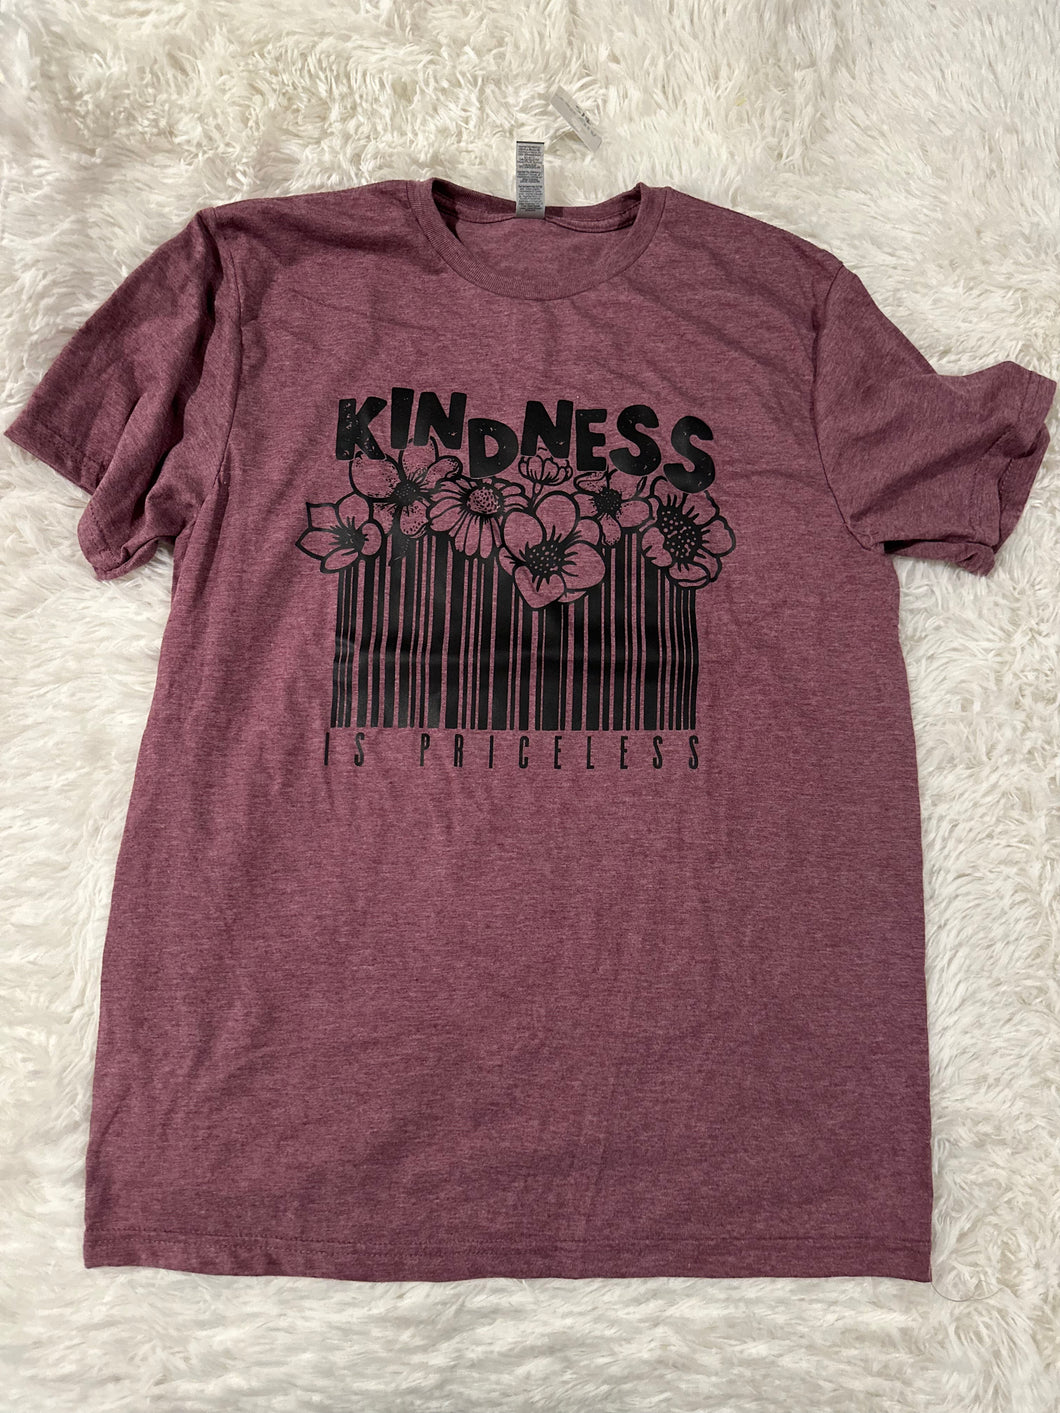 kindness is priceless T-Shirt - SMALL